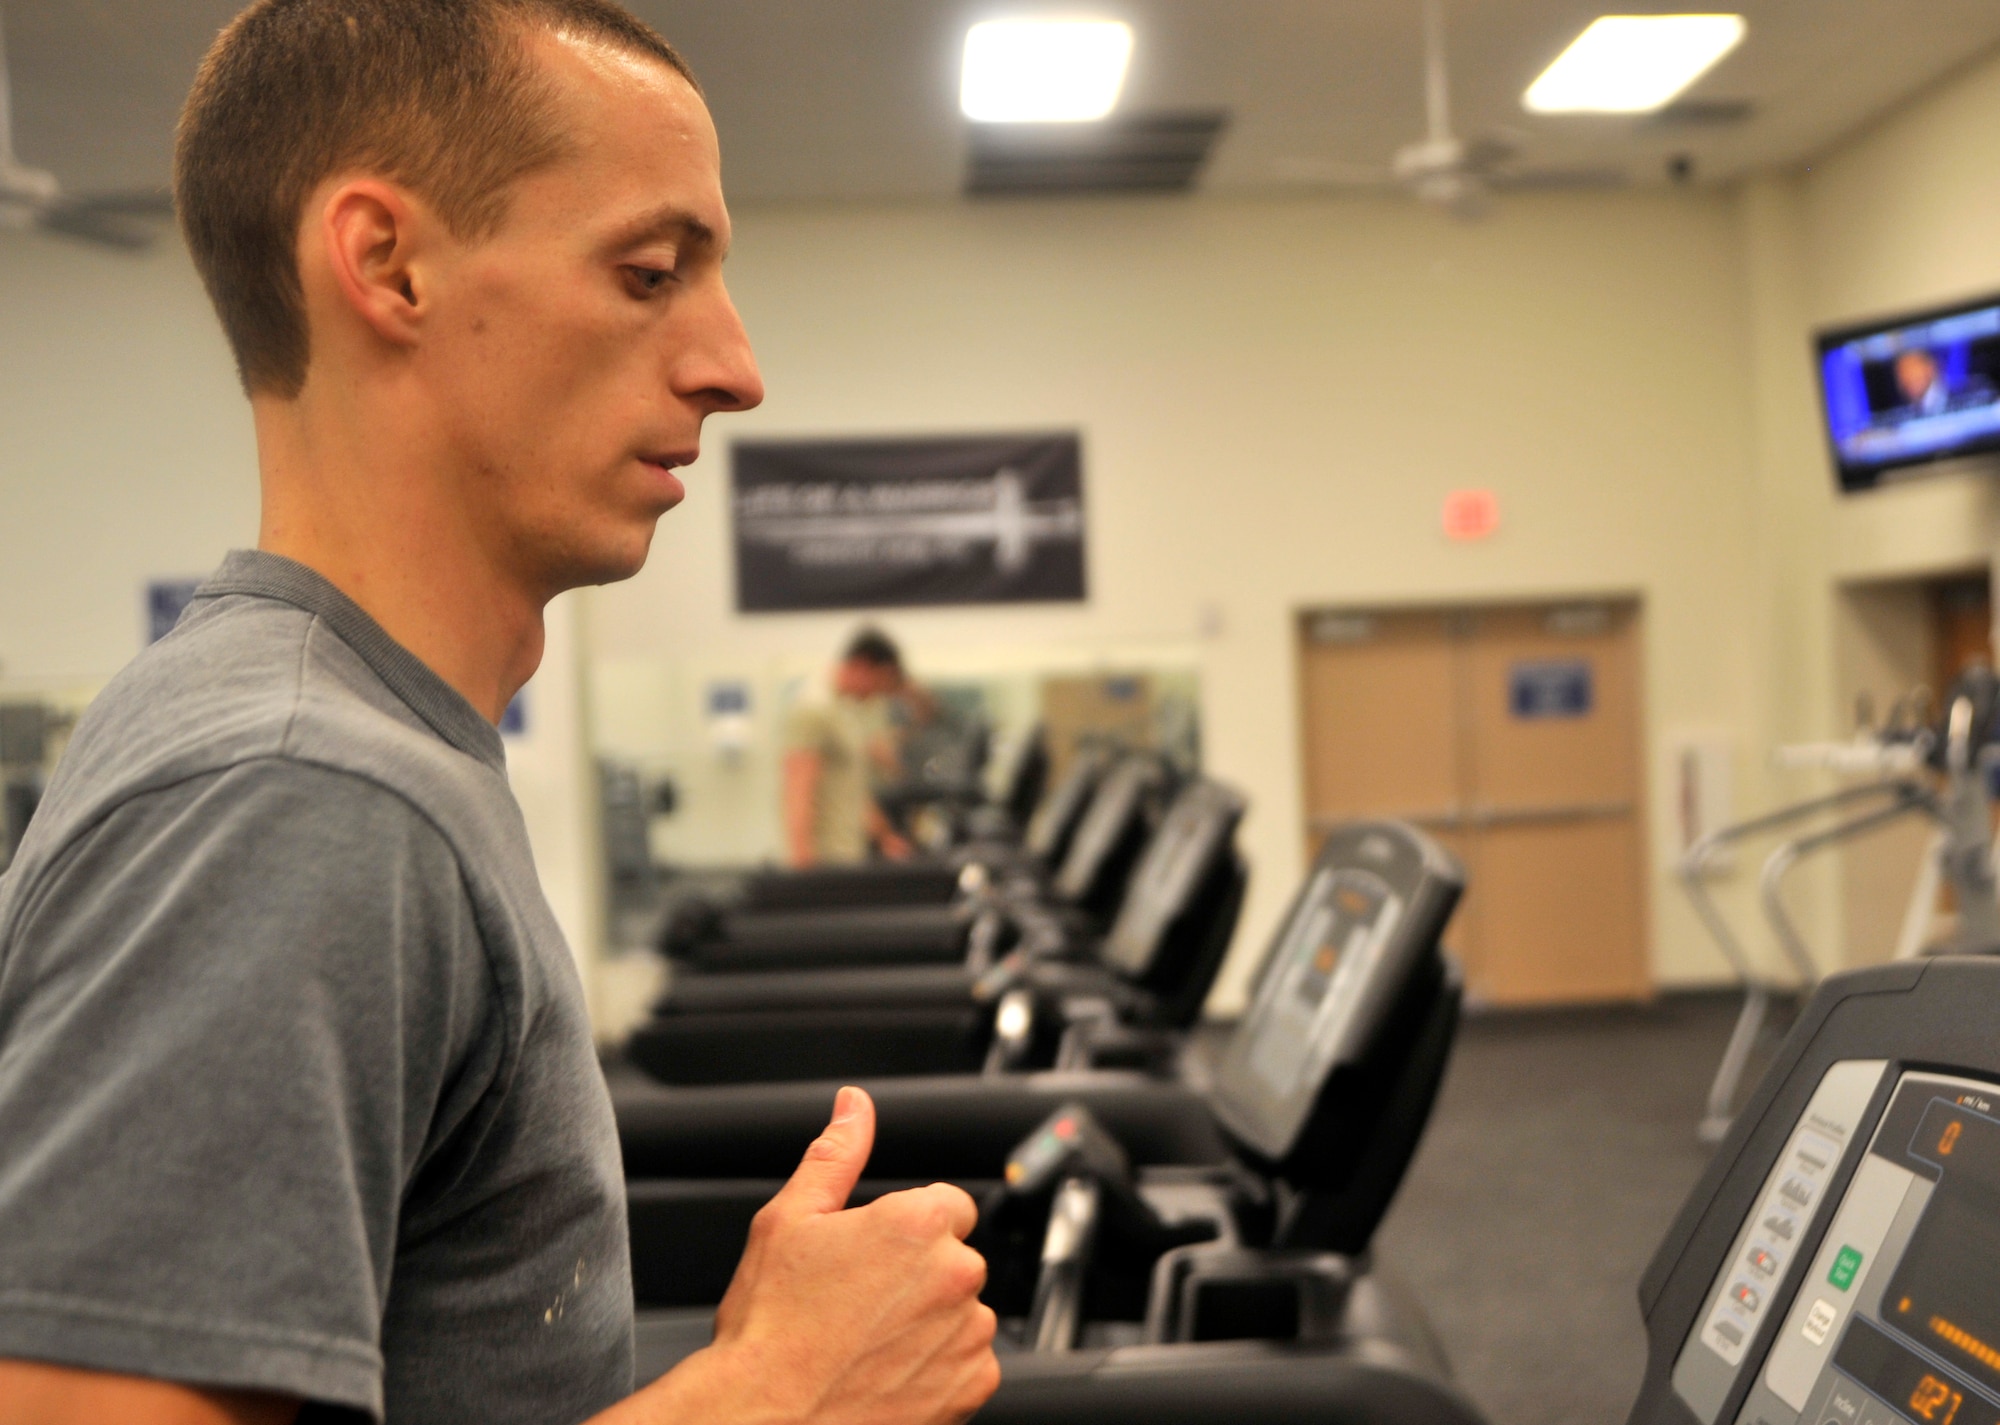 2nd Lt. Joel, 11th Reconnaissance Squadron intelligence instructor, runs on a new treadmill in the Predator Fitness Center Dec. 11, 2014, at Creech Air Force Base, Nevada. The 799th Air Base Group renovated the facility and replaced all the cardio equipment Dec. 4-5, 2014, providing better services and workout capabilities for Creech Airmen. (U.S. Air Force photo by Airman 1st Class Christian Clausen/Released)(Last names withheld for security purposes)